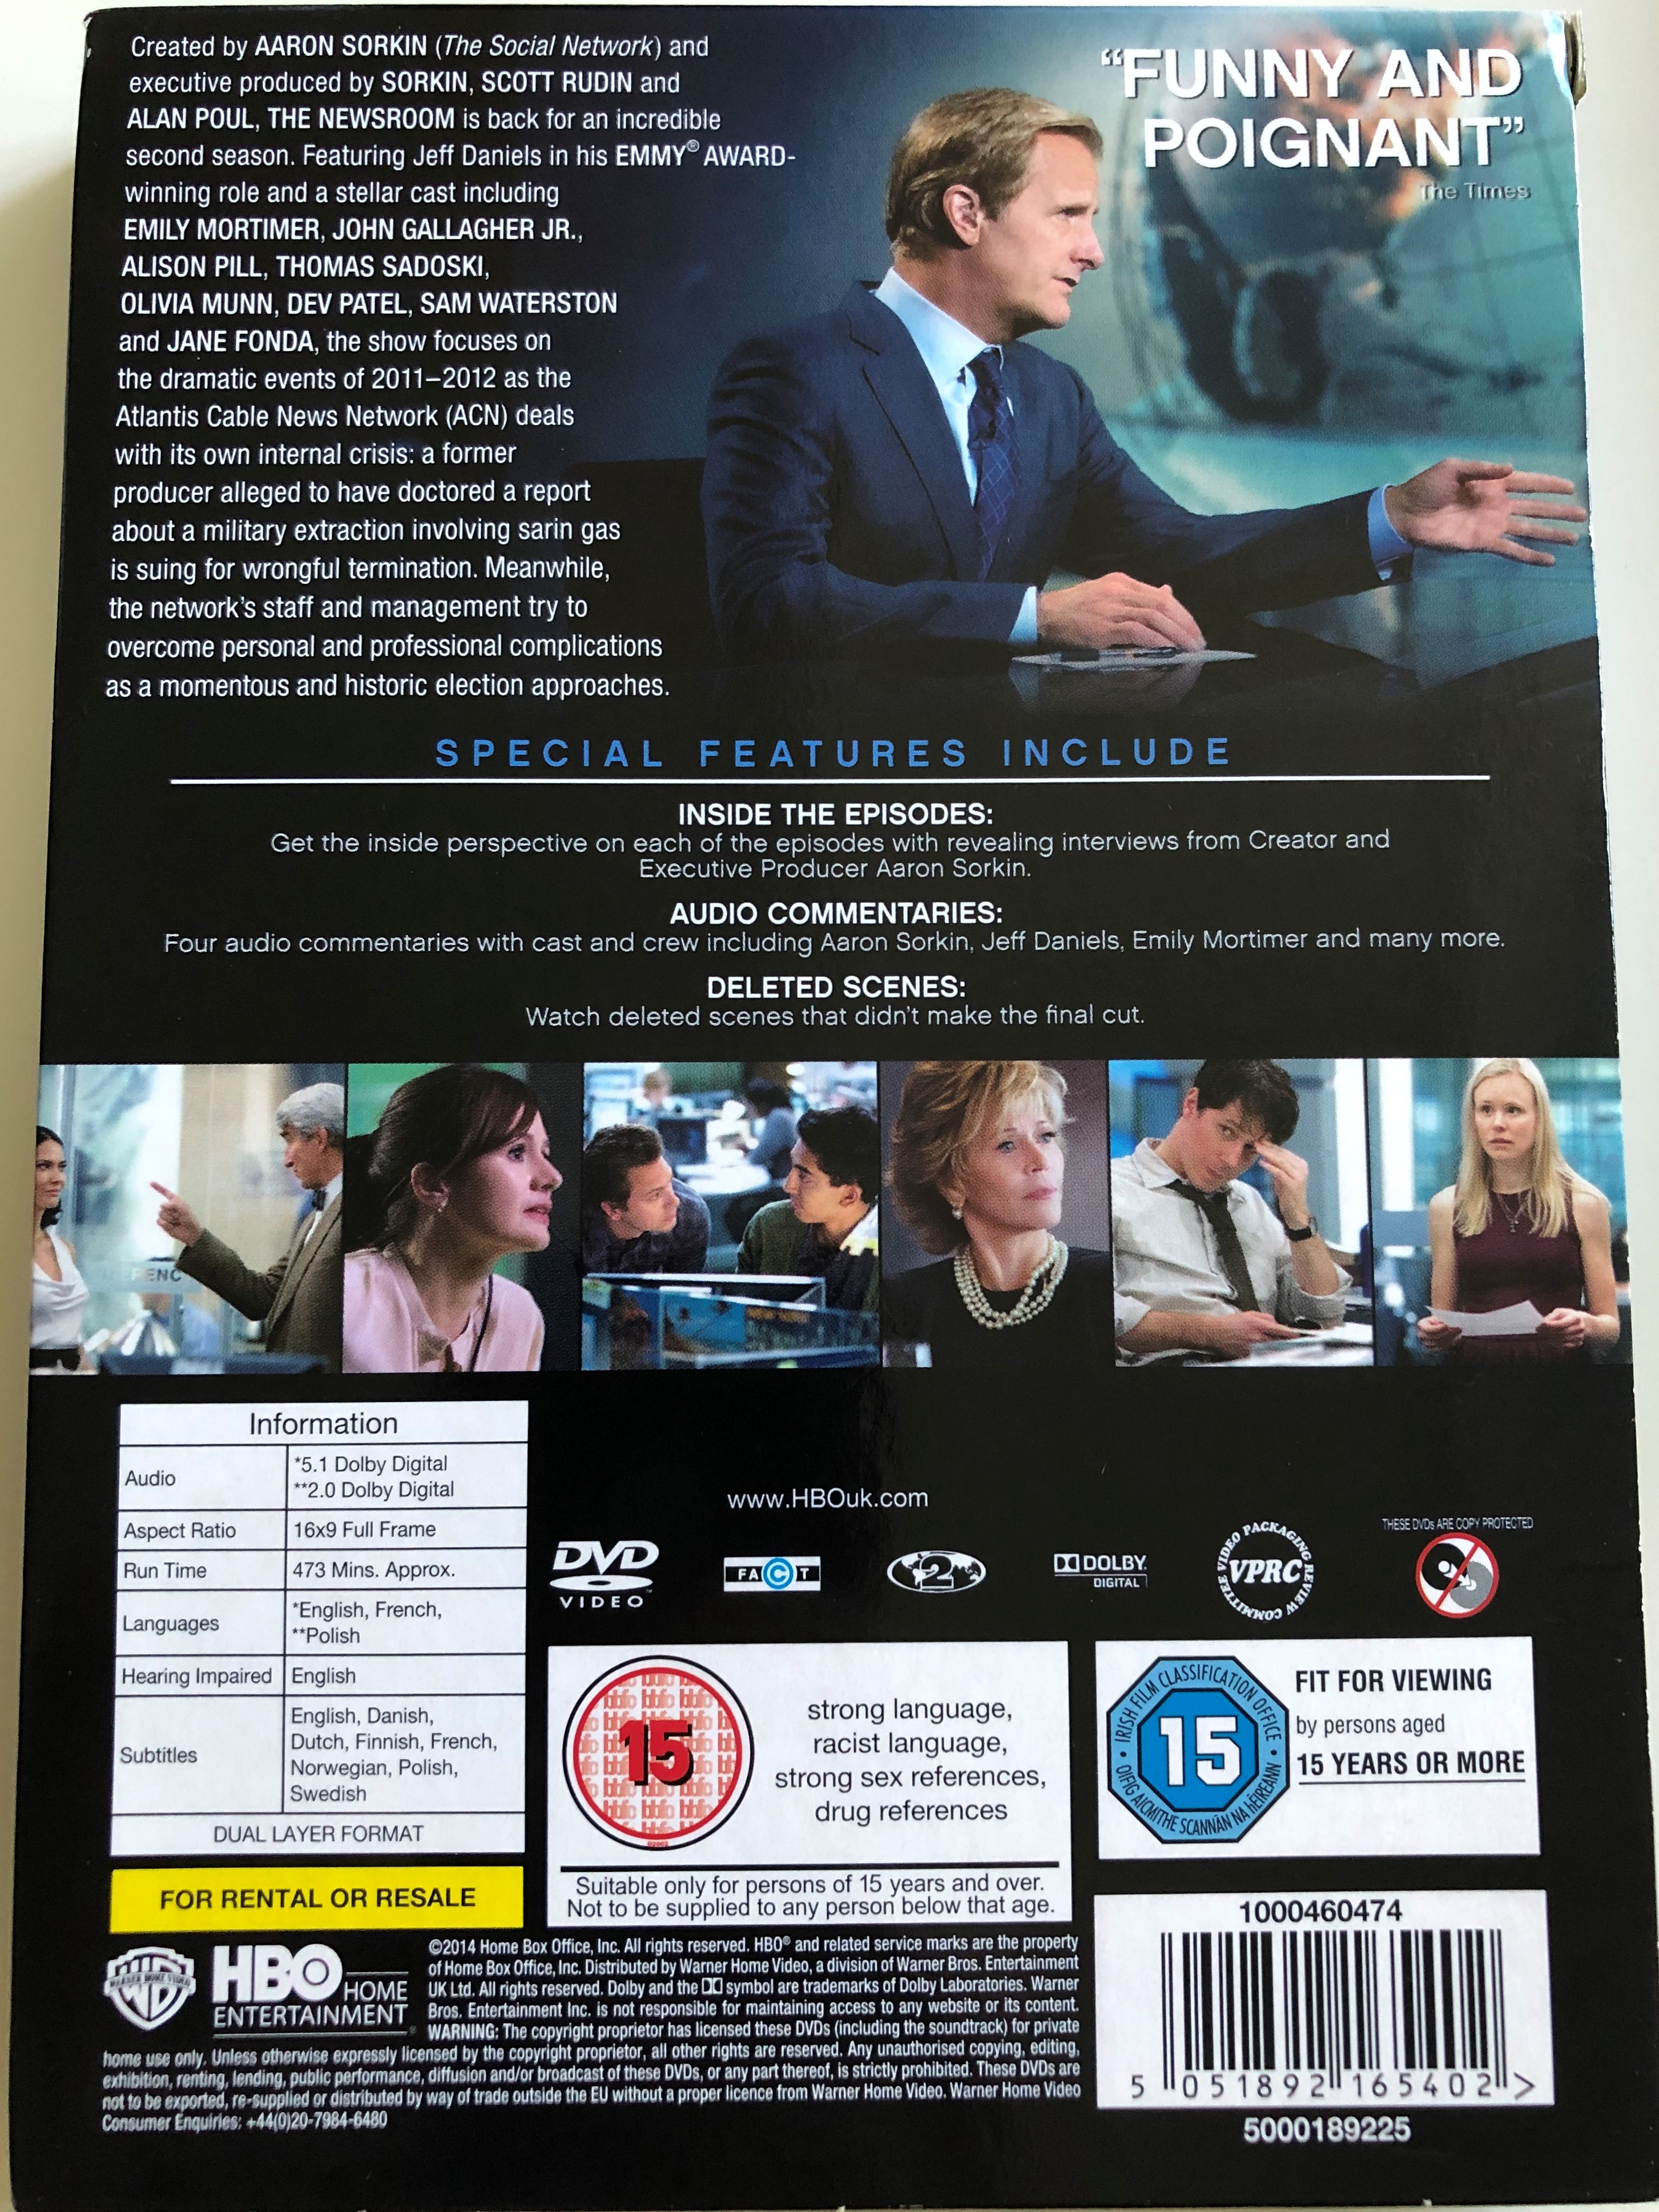 the-newsroom-dvd-2014-the-complete-second-season-created-by-aaron-sorkin-a-hbo-original-series-together-the-stand-alone-2-.jpg